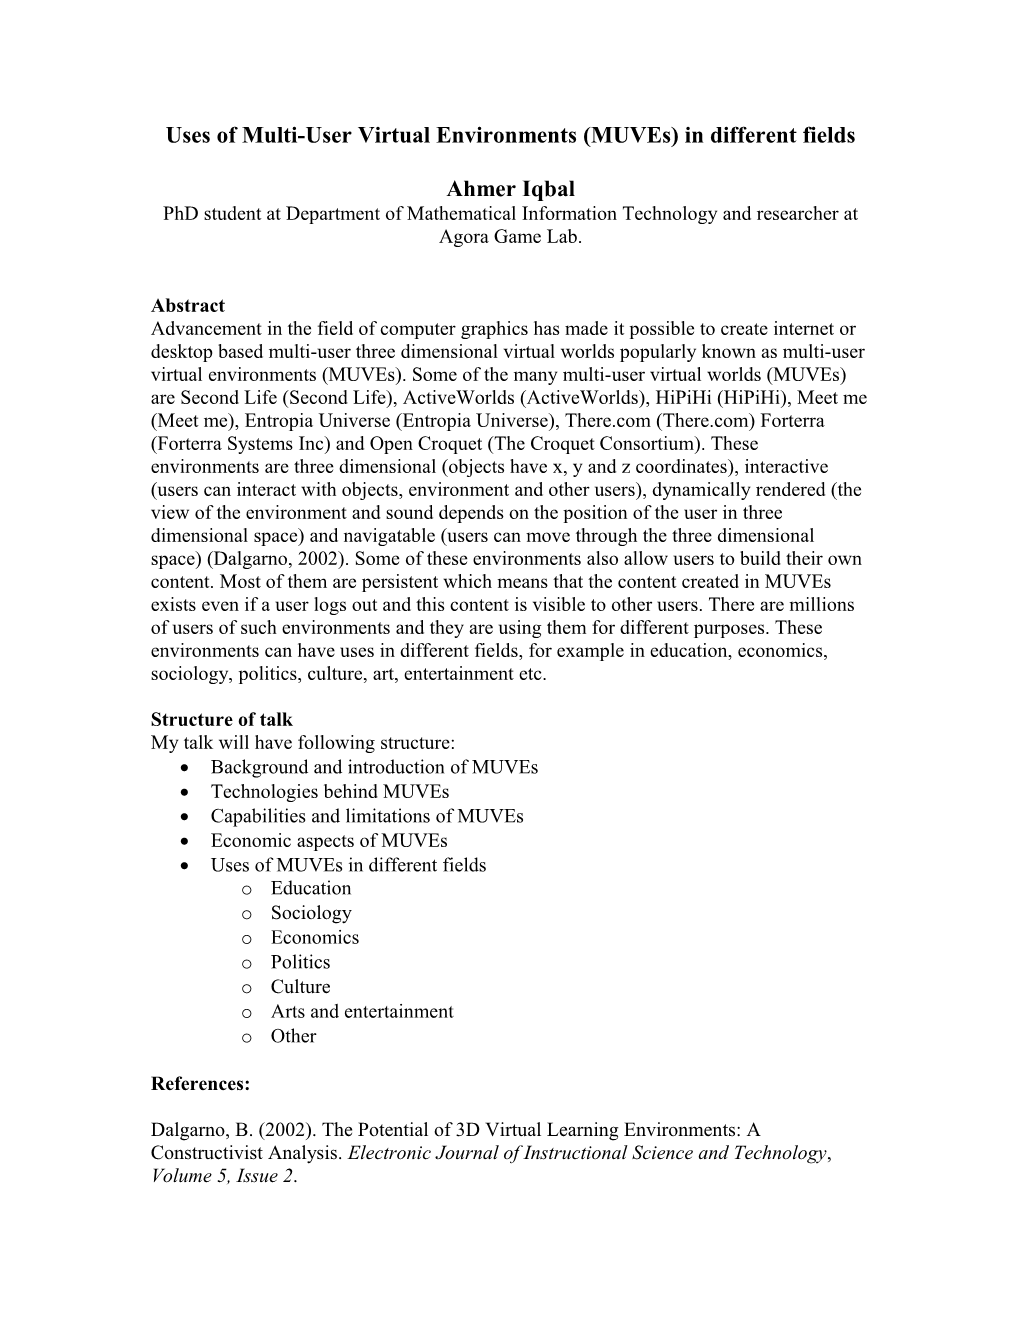 Uses of Multi-User Virtual Environments (Muves) in Different Fields